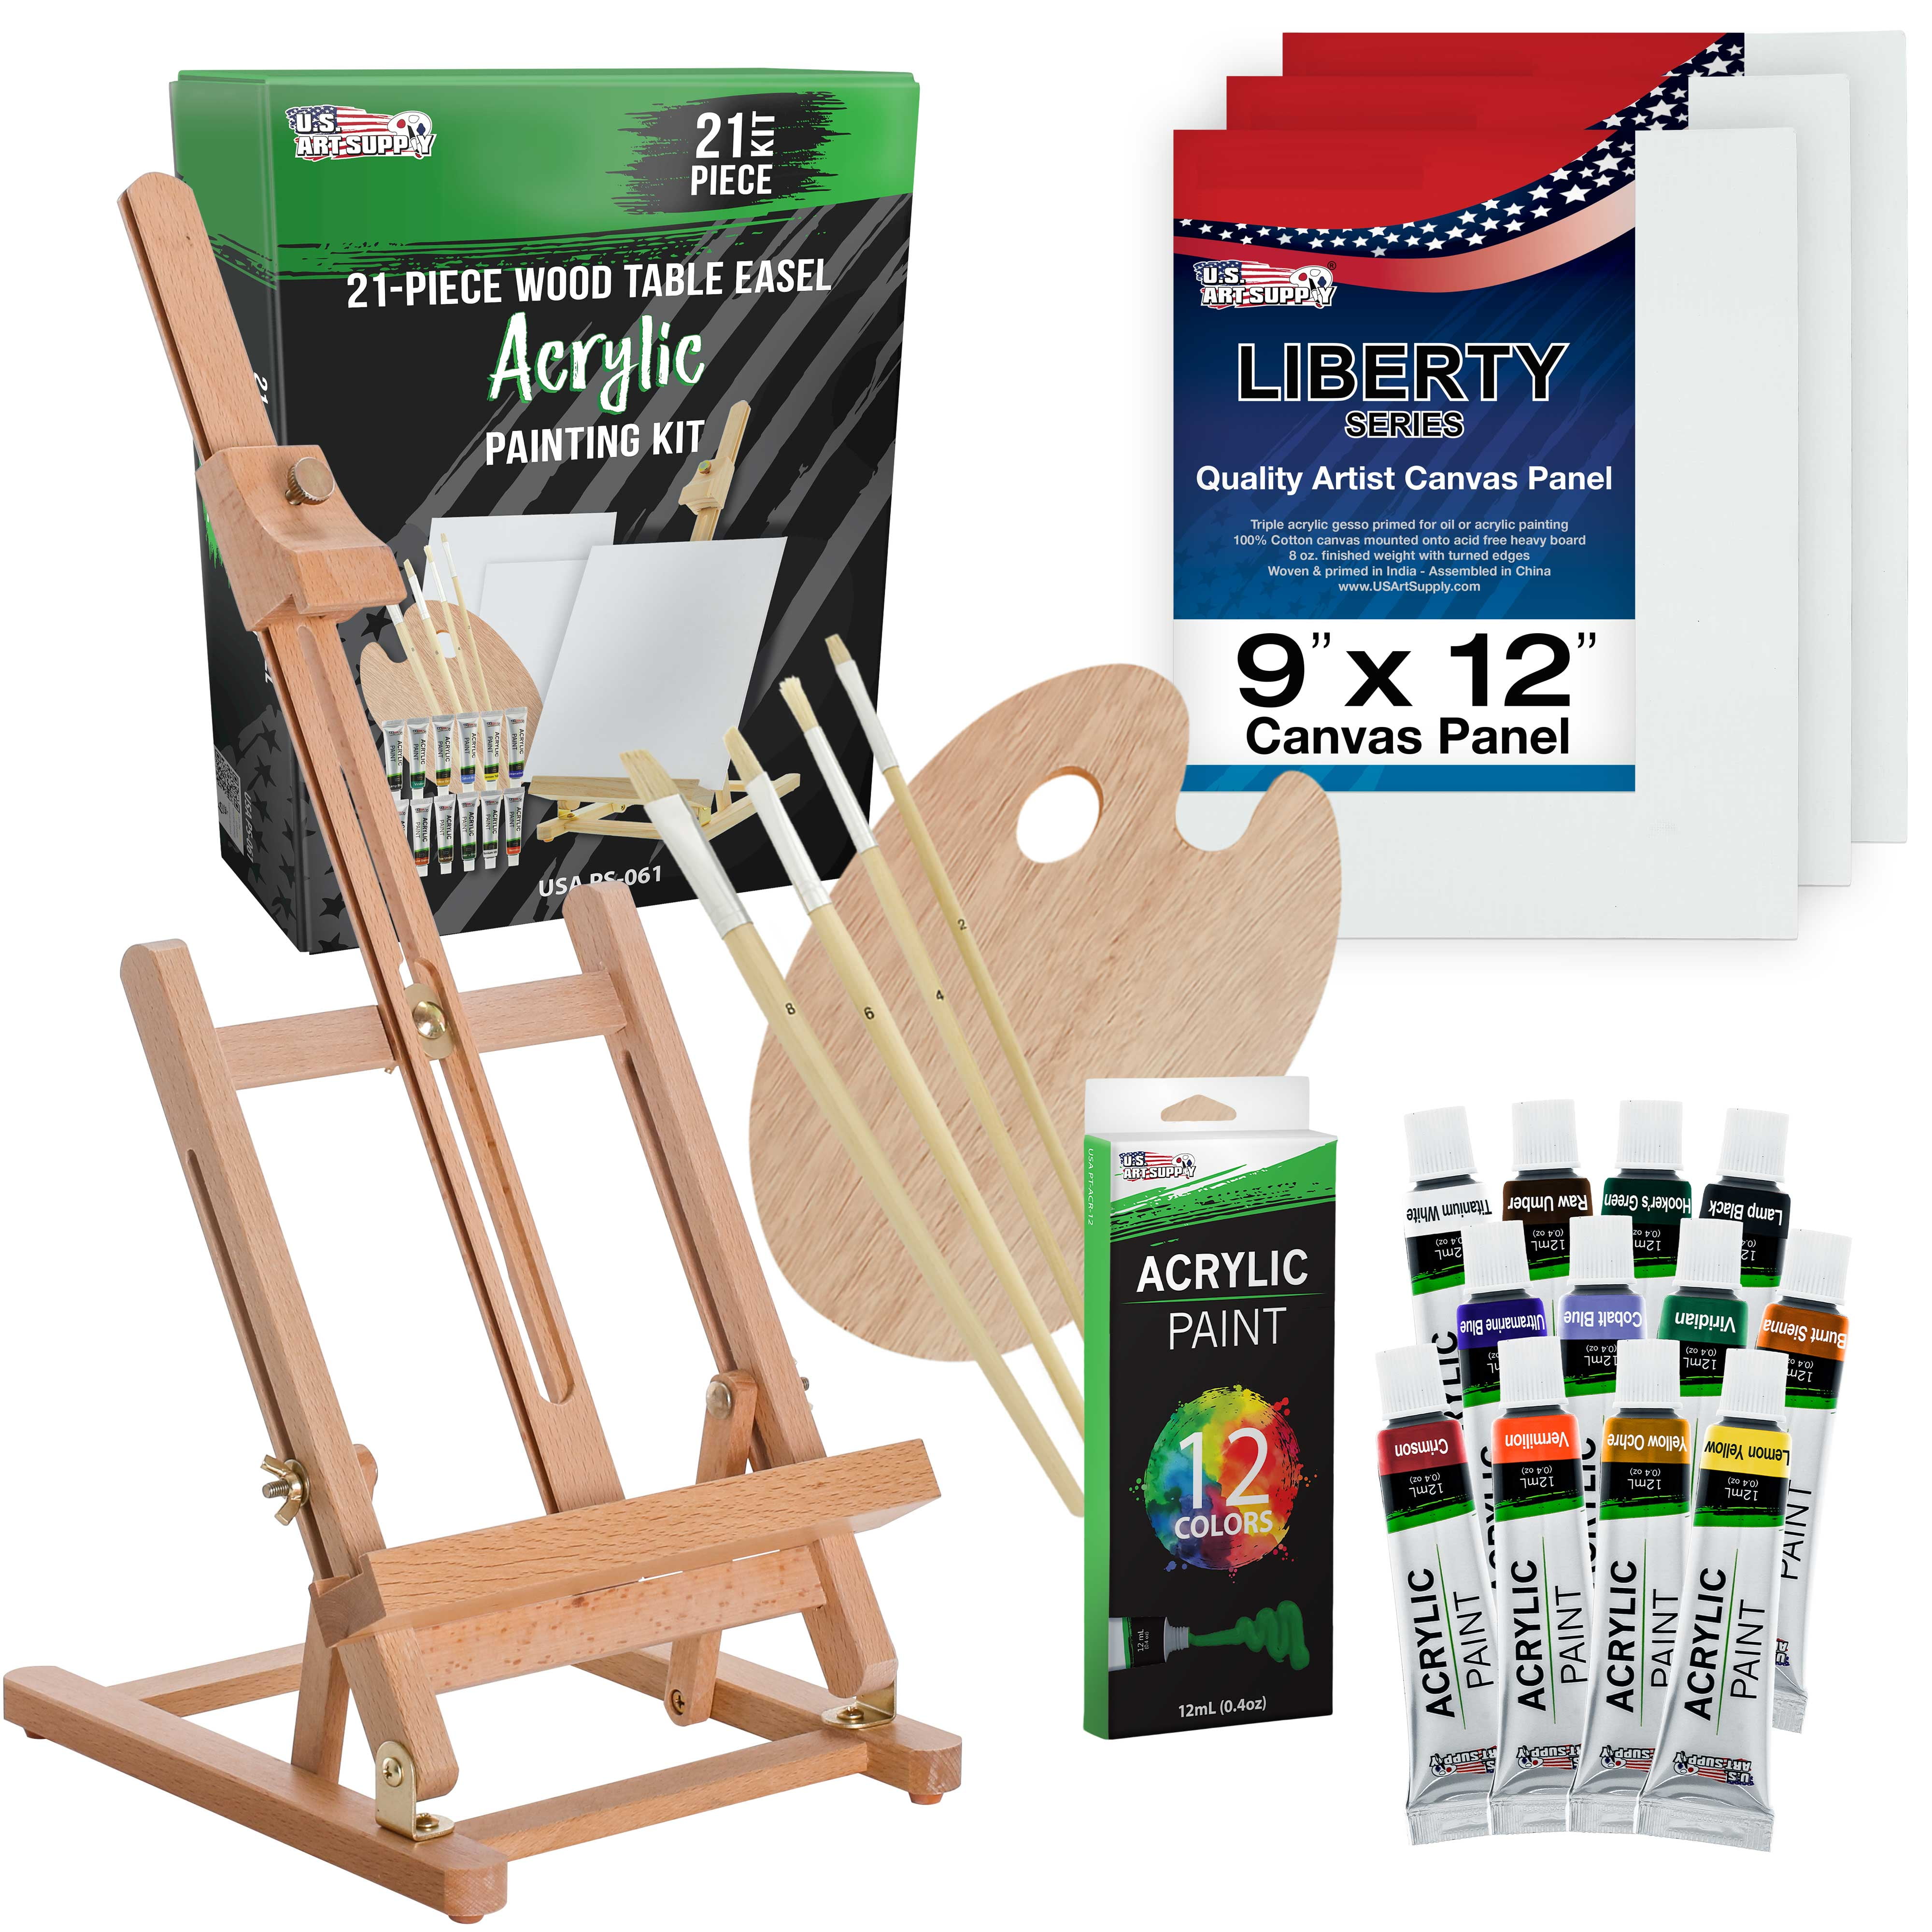  U.S. Art Supply 33-Piece Custom Artist Acrylic Painting Set  with Wooden H-Frame Studio Easel, 12 Vivid Acrylic Paint Colors, 3 Canvas  Panels, 13 Brushes, Painting Palette, Painting Pad - Starter Kit